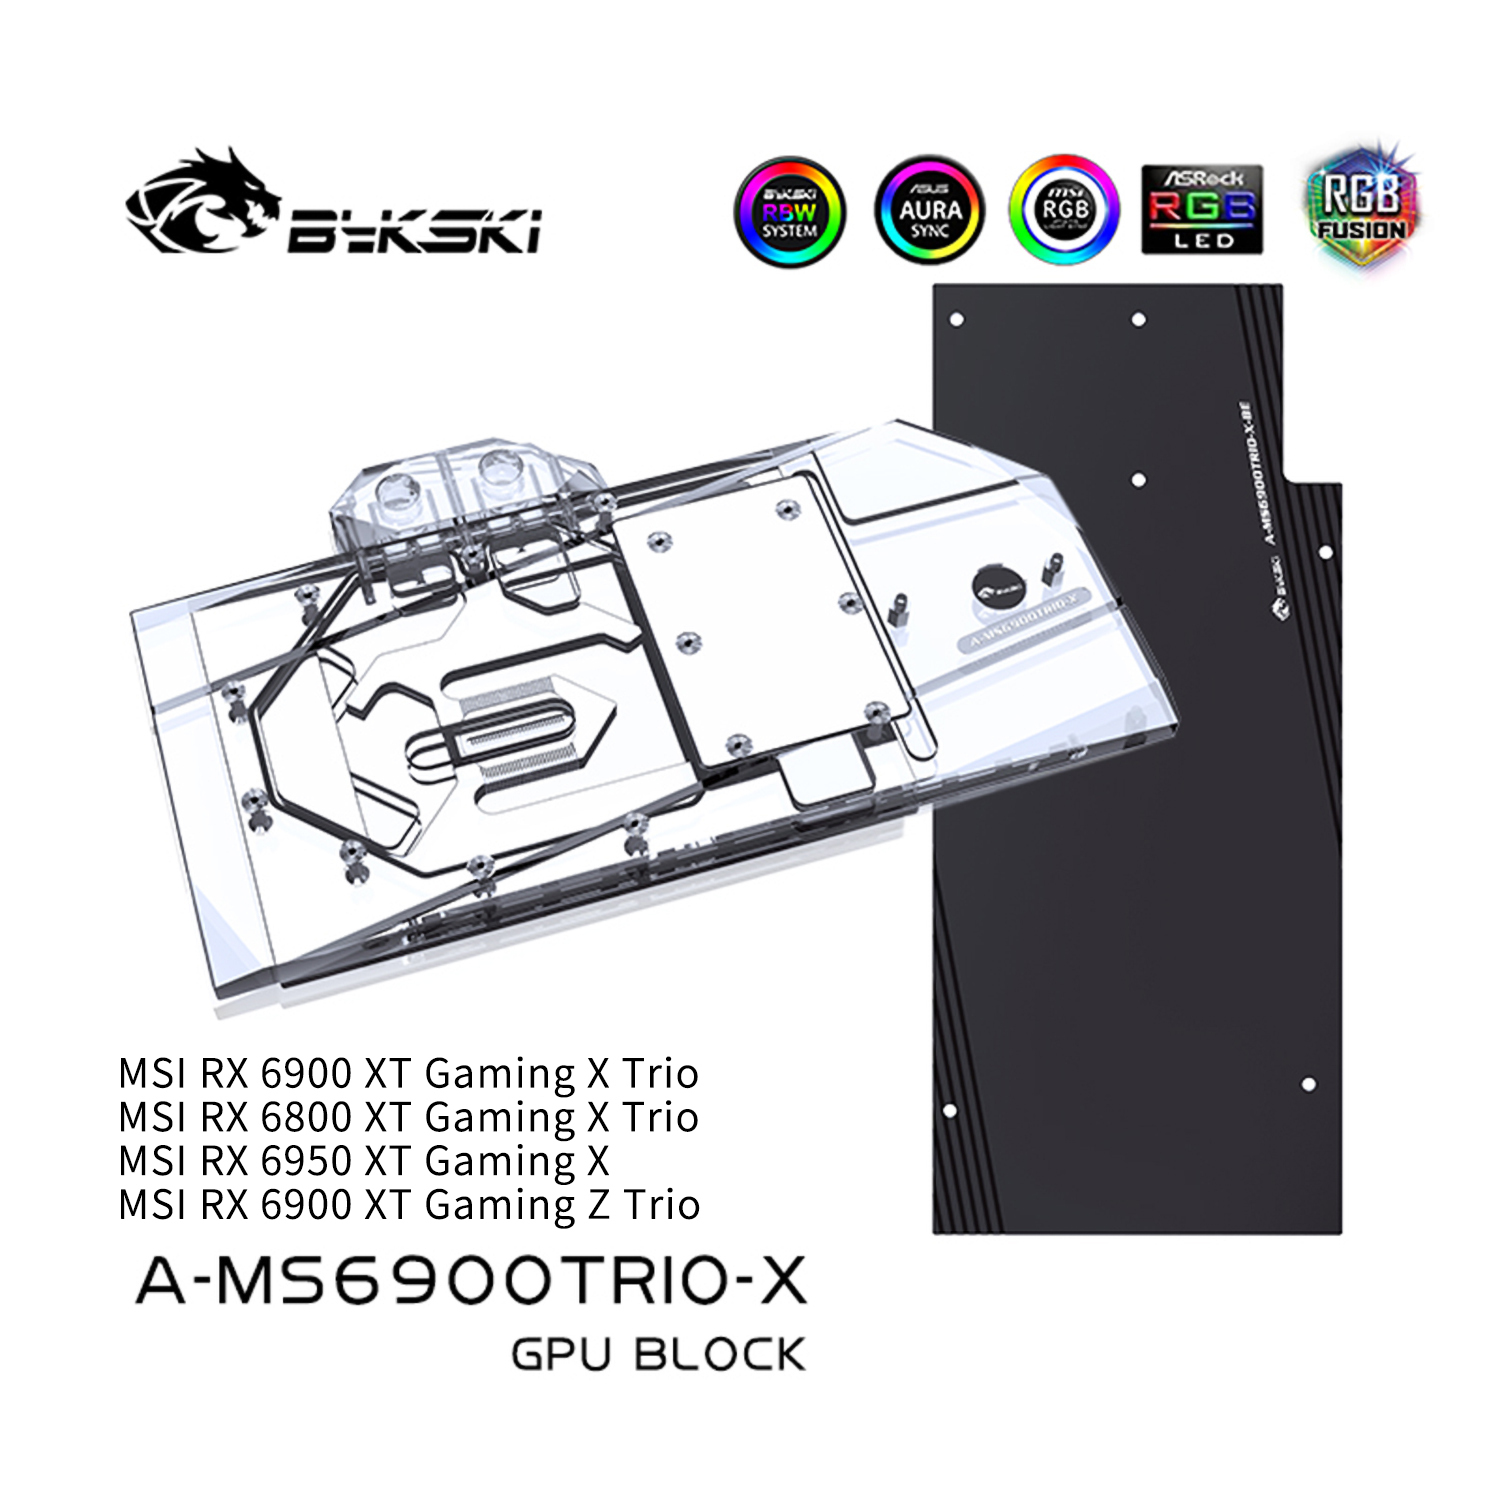 BARROW 6900 GPU Water Cooling Block,Full coverage For AMD Founder Edition  MSI Sapphire RX 6900 6800 XT,BS-AMD6900XT-PA - AliExpress